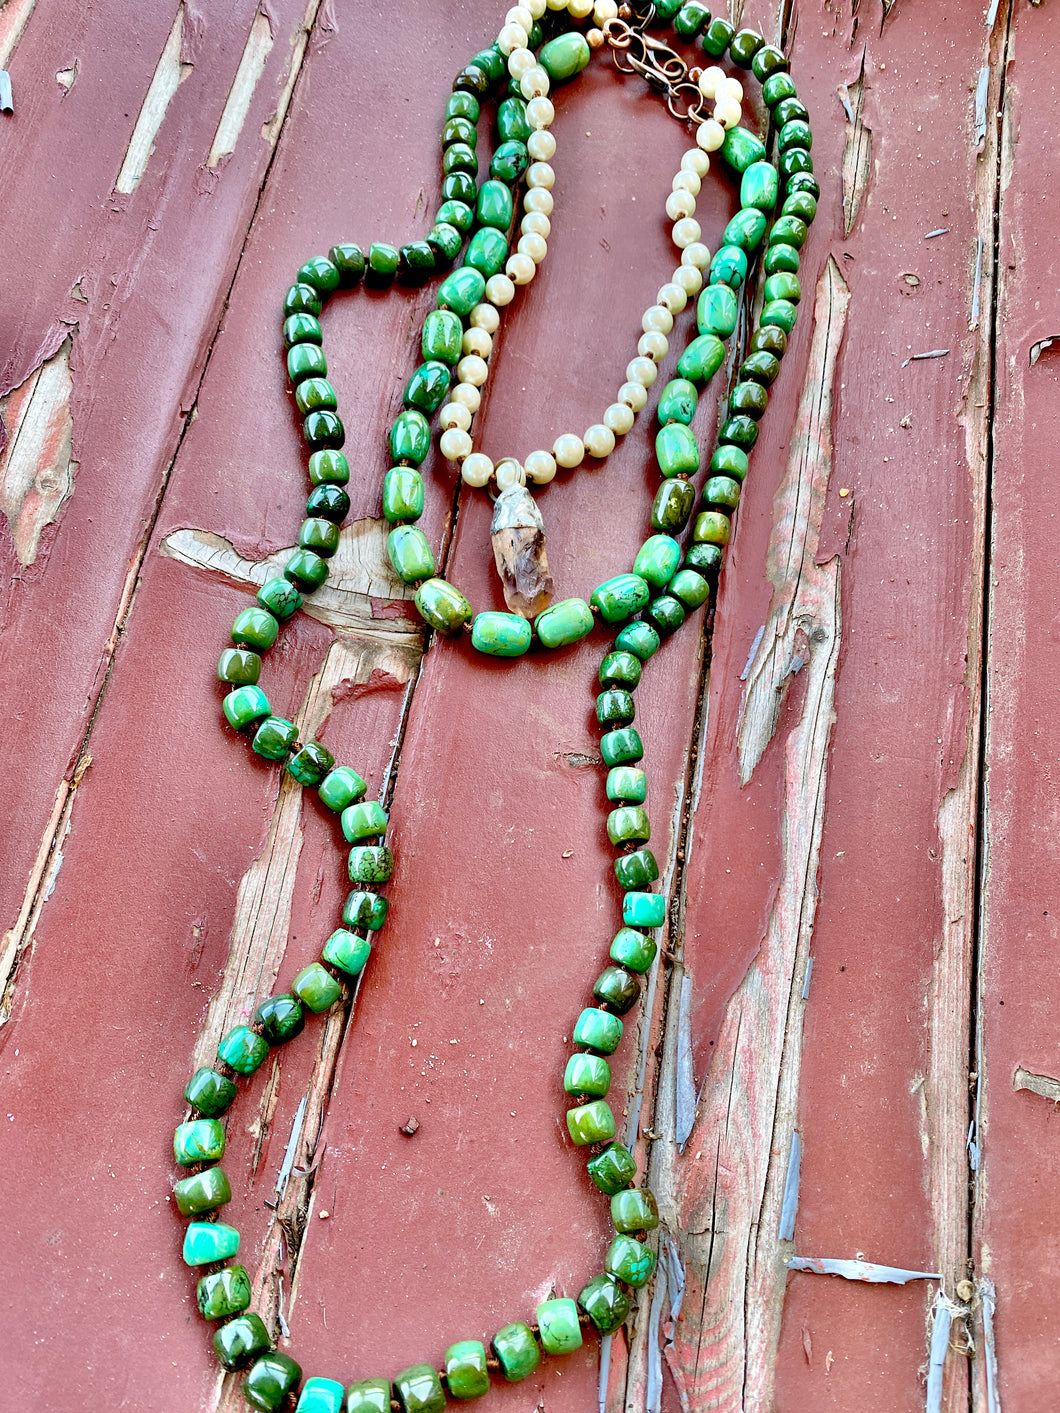 The turquoise trail necklaces